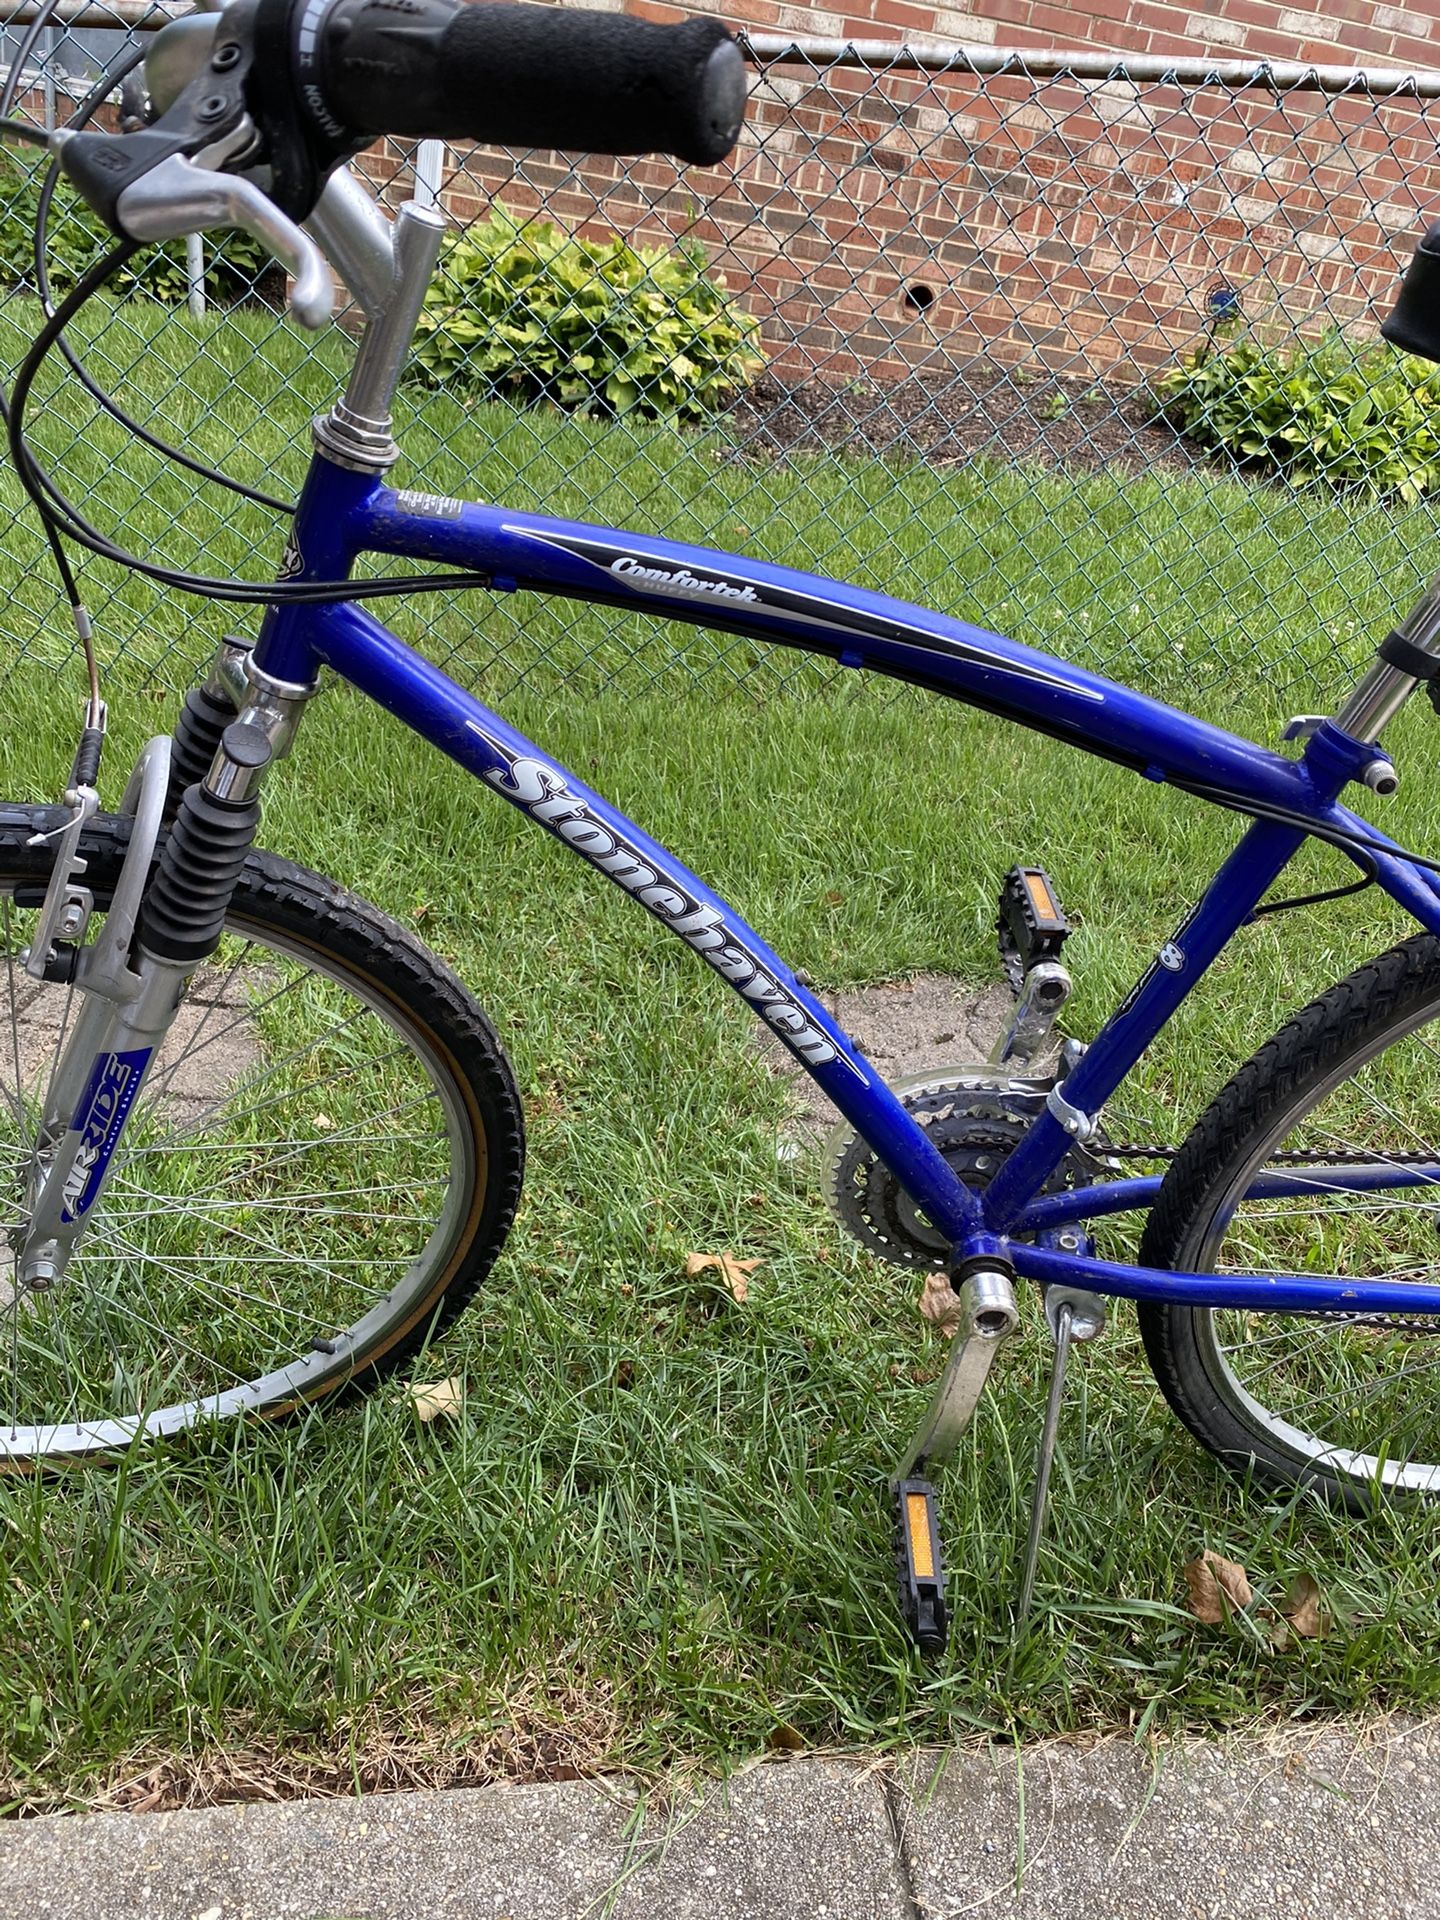 Bike for sale. For fix or parts!